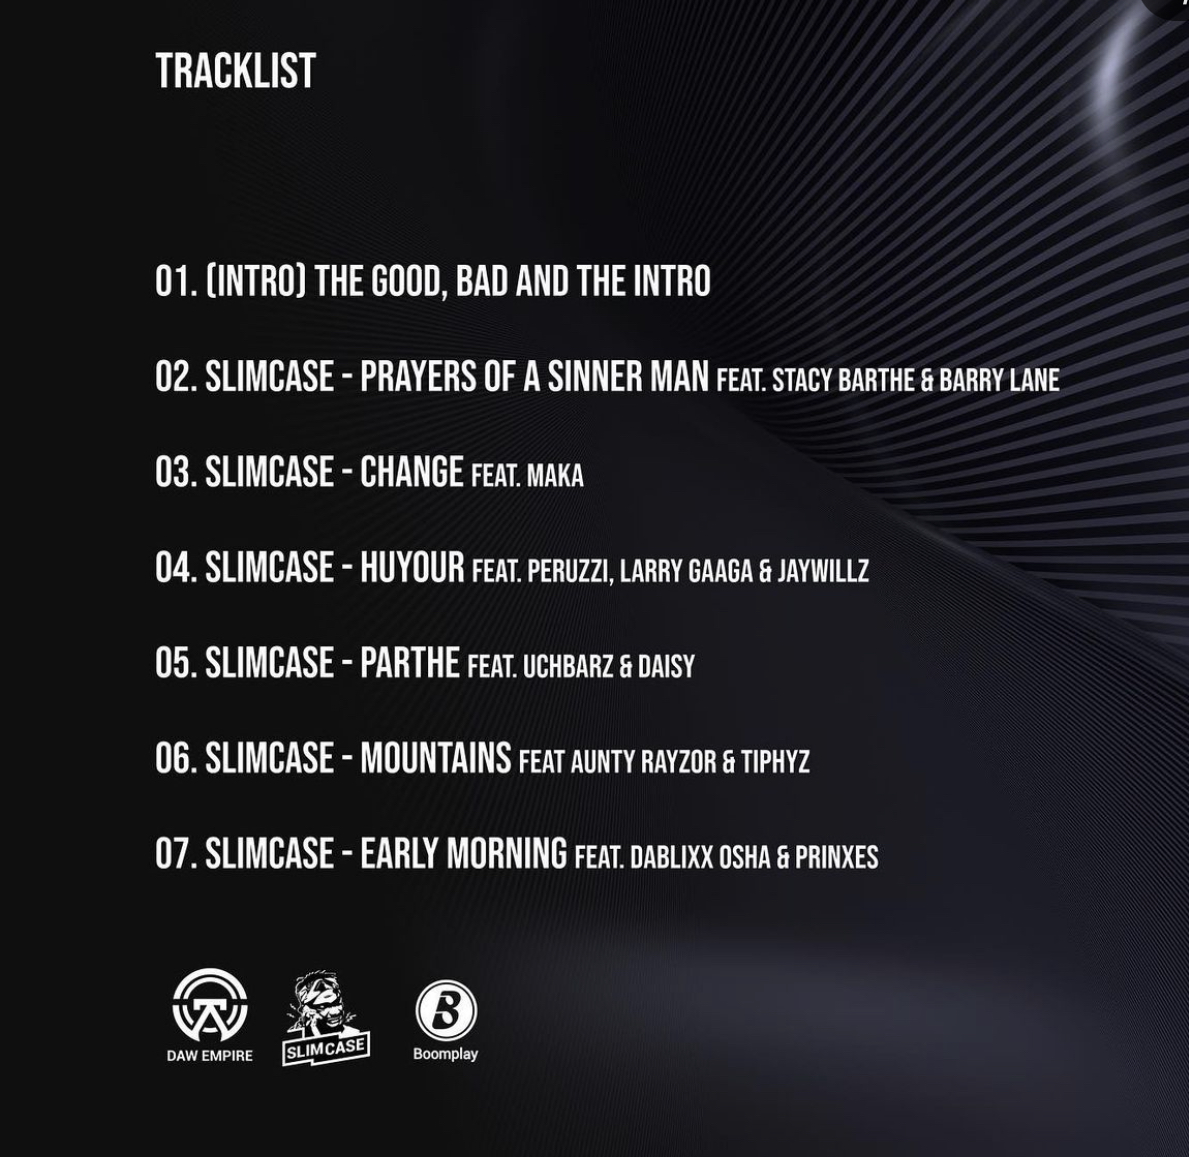 Slimcase returns with "The Slim Case Show - The Evolution EP" Tracklist